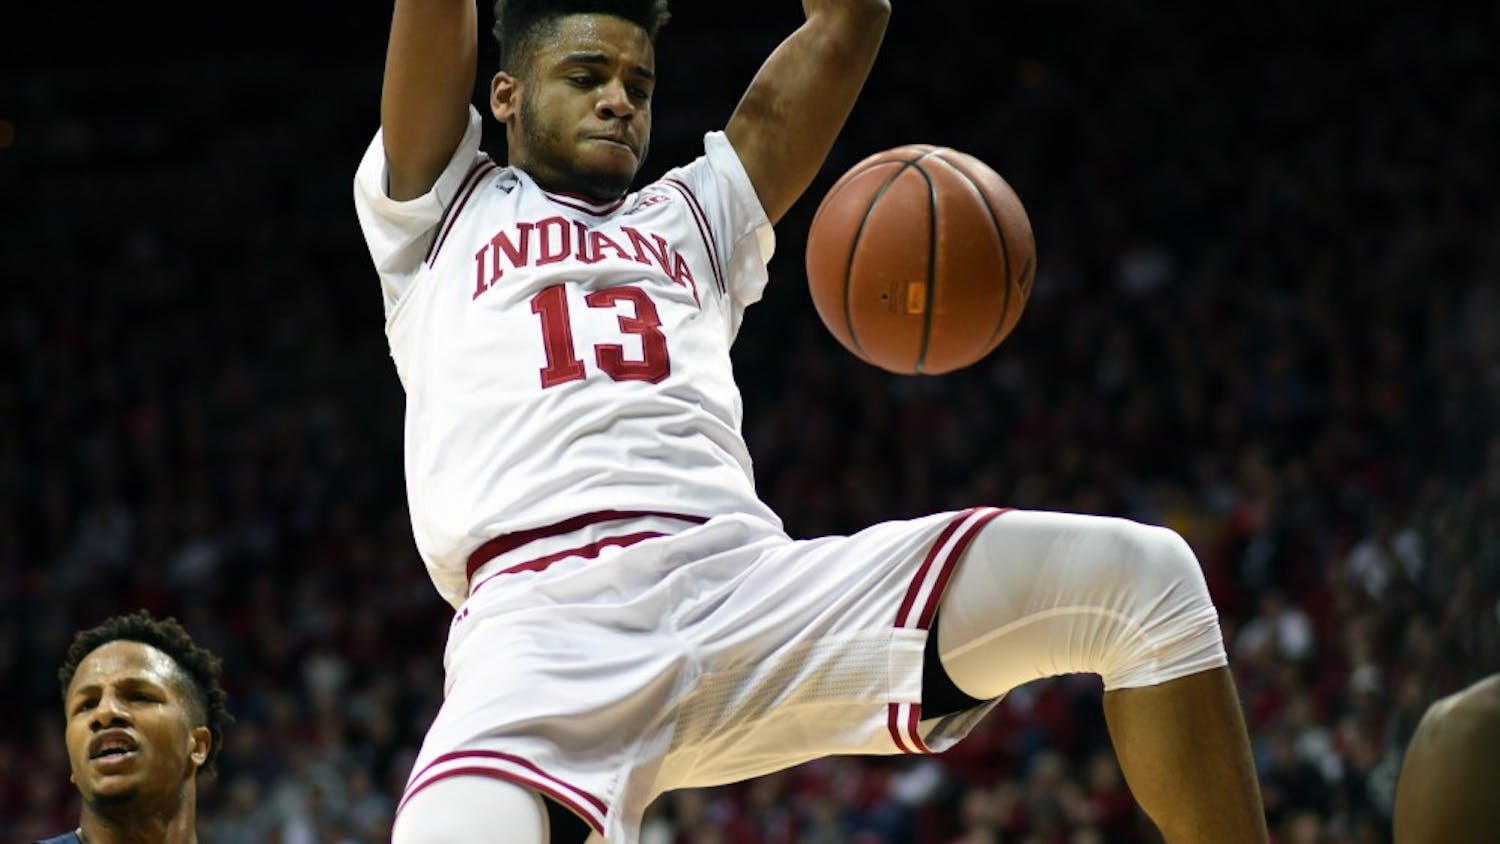 Junior forward Juwan Morgan dunks the ball against Penn State on Jan. 9 in Simon Skjodt Assembly Hall. Morgan had 21 points and 11 rebounds in IU's 74-70 win against Penn State.